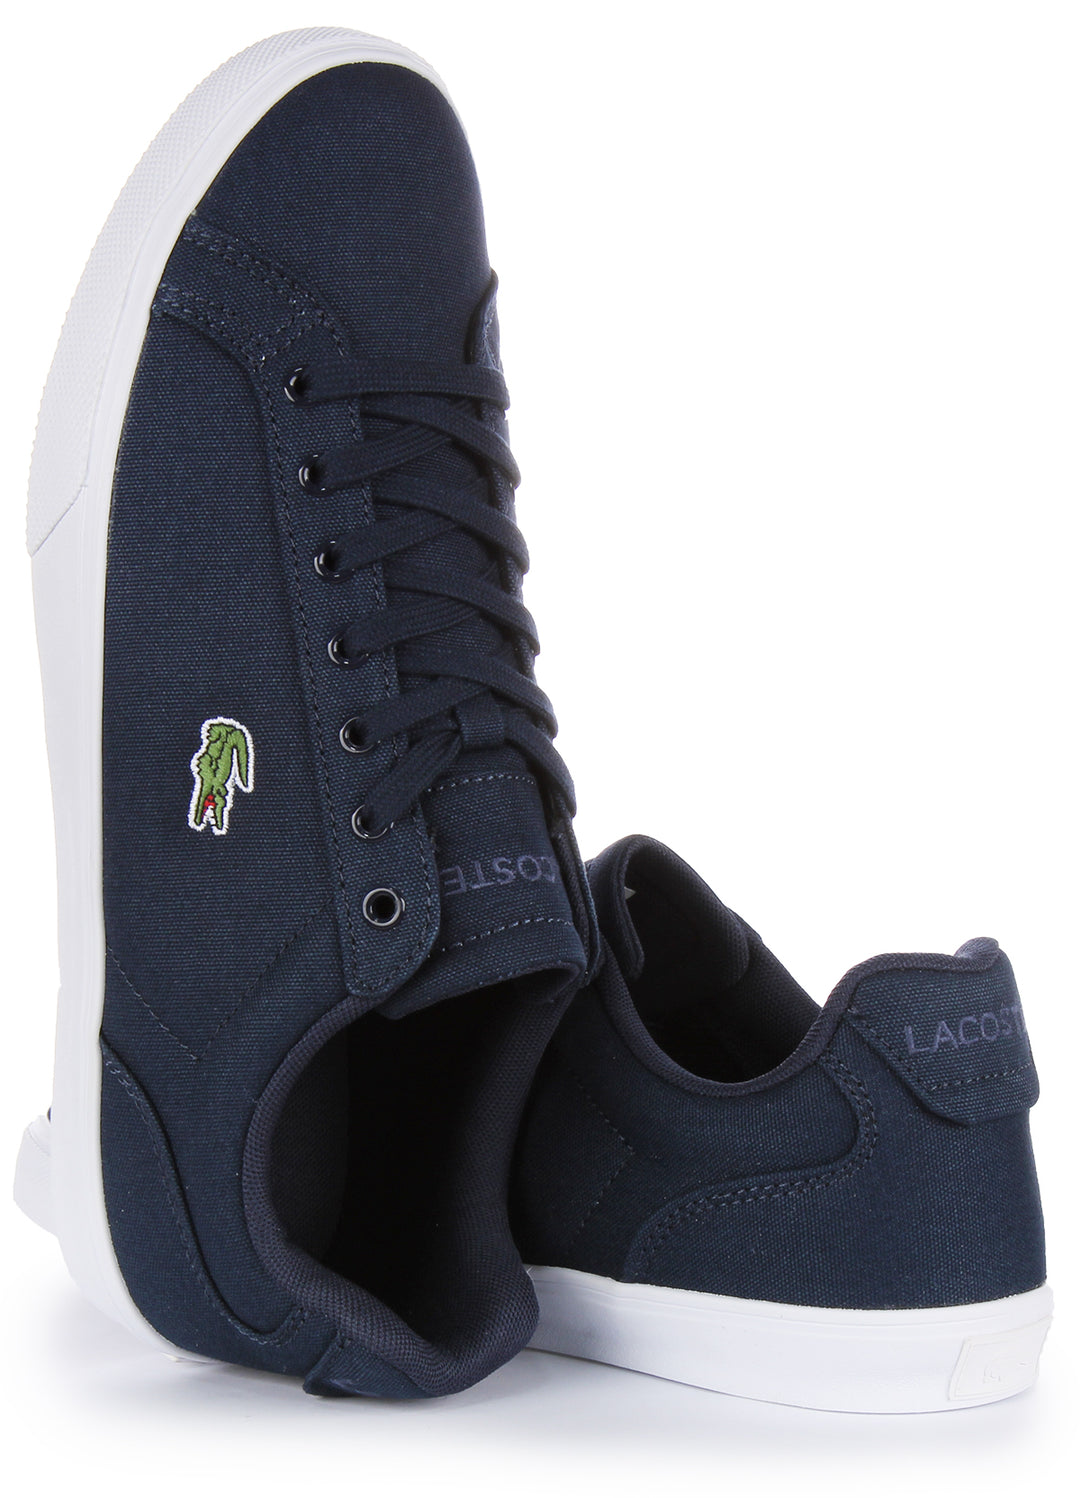 Lacoste Lerond Pro In Navy White For Men